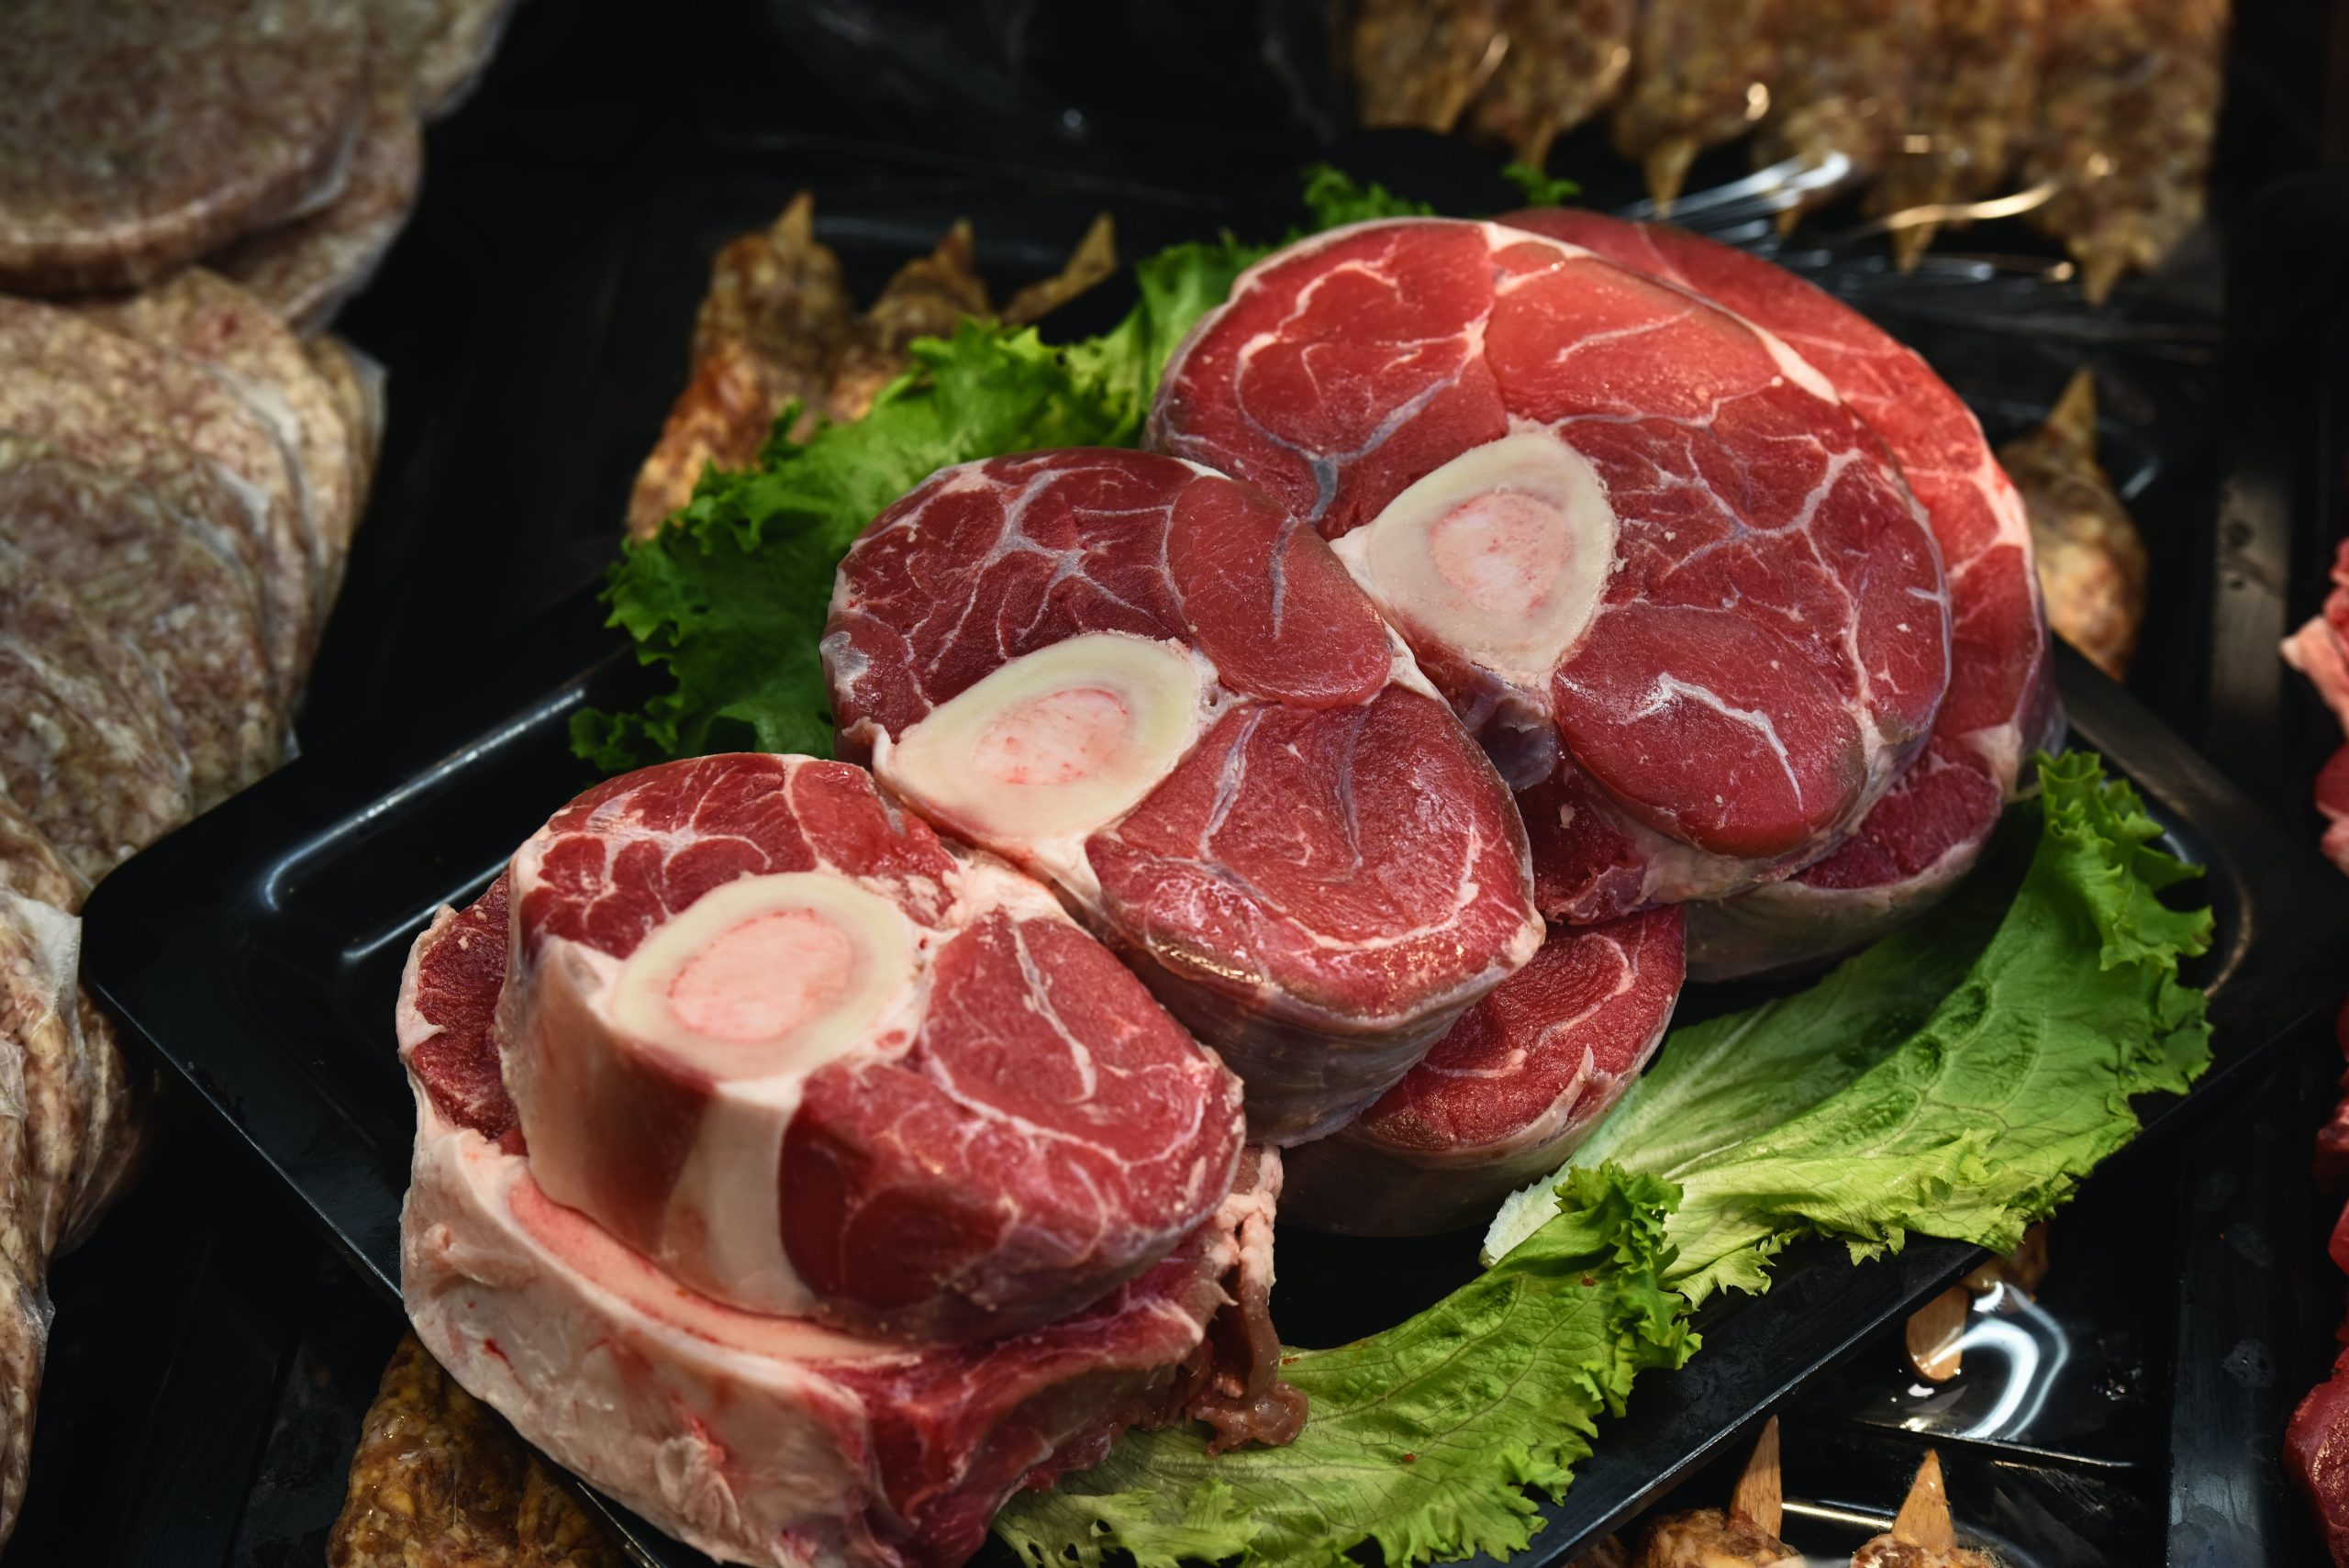 Meat’s Role in Modern Diets: Health Benefits and Risks Explored